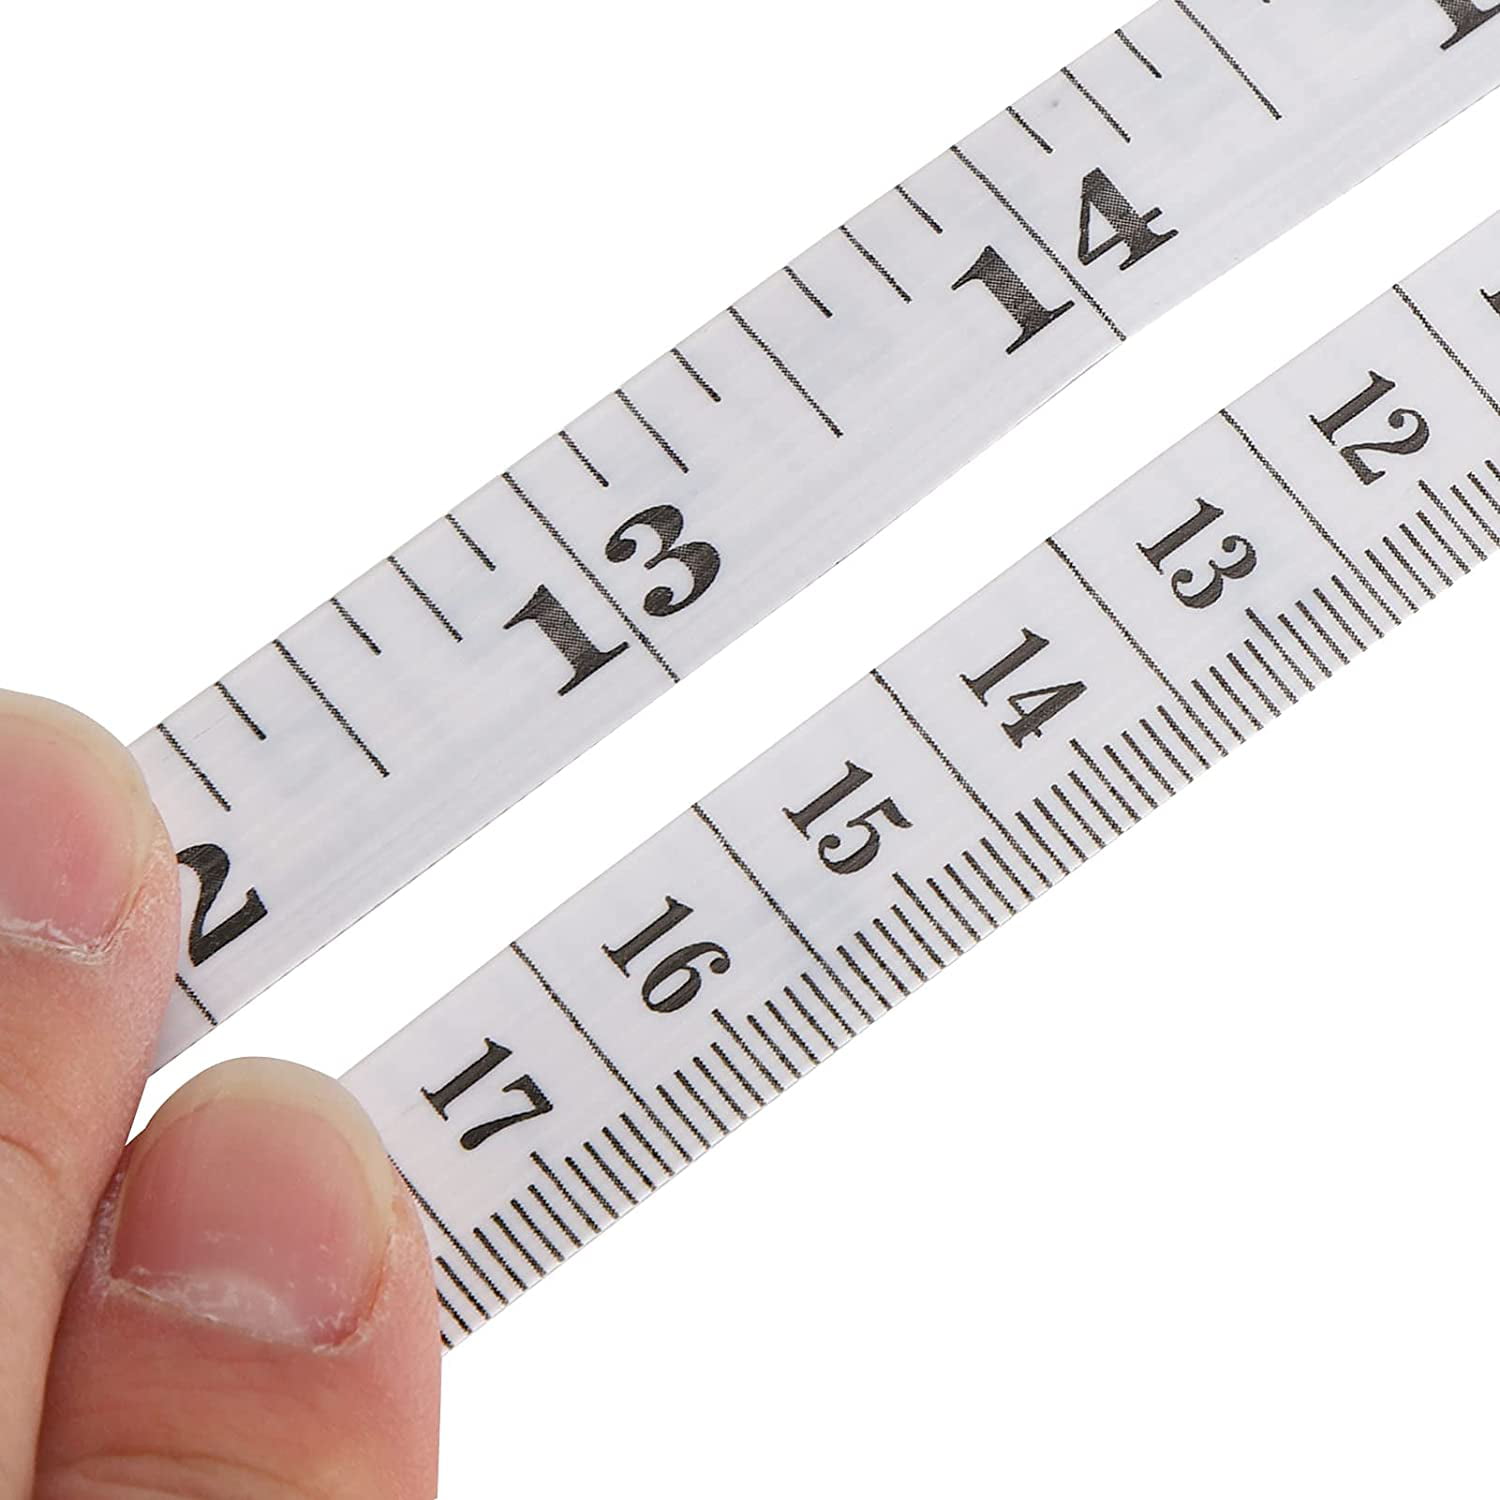 Soft Measure Sewing Tailor Ruler Tape - 2724456970578,150cm price in Egypt,  Egypt